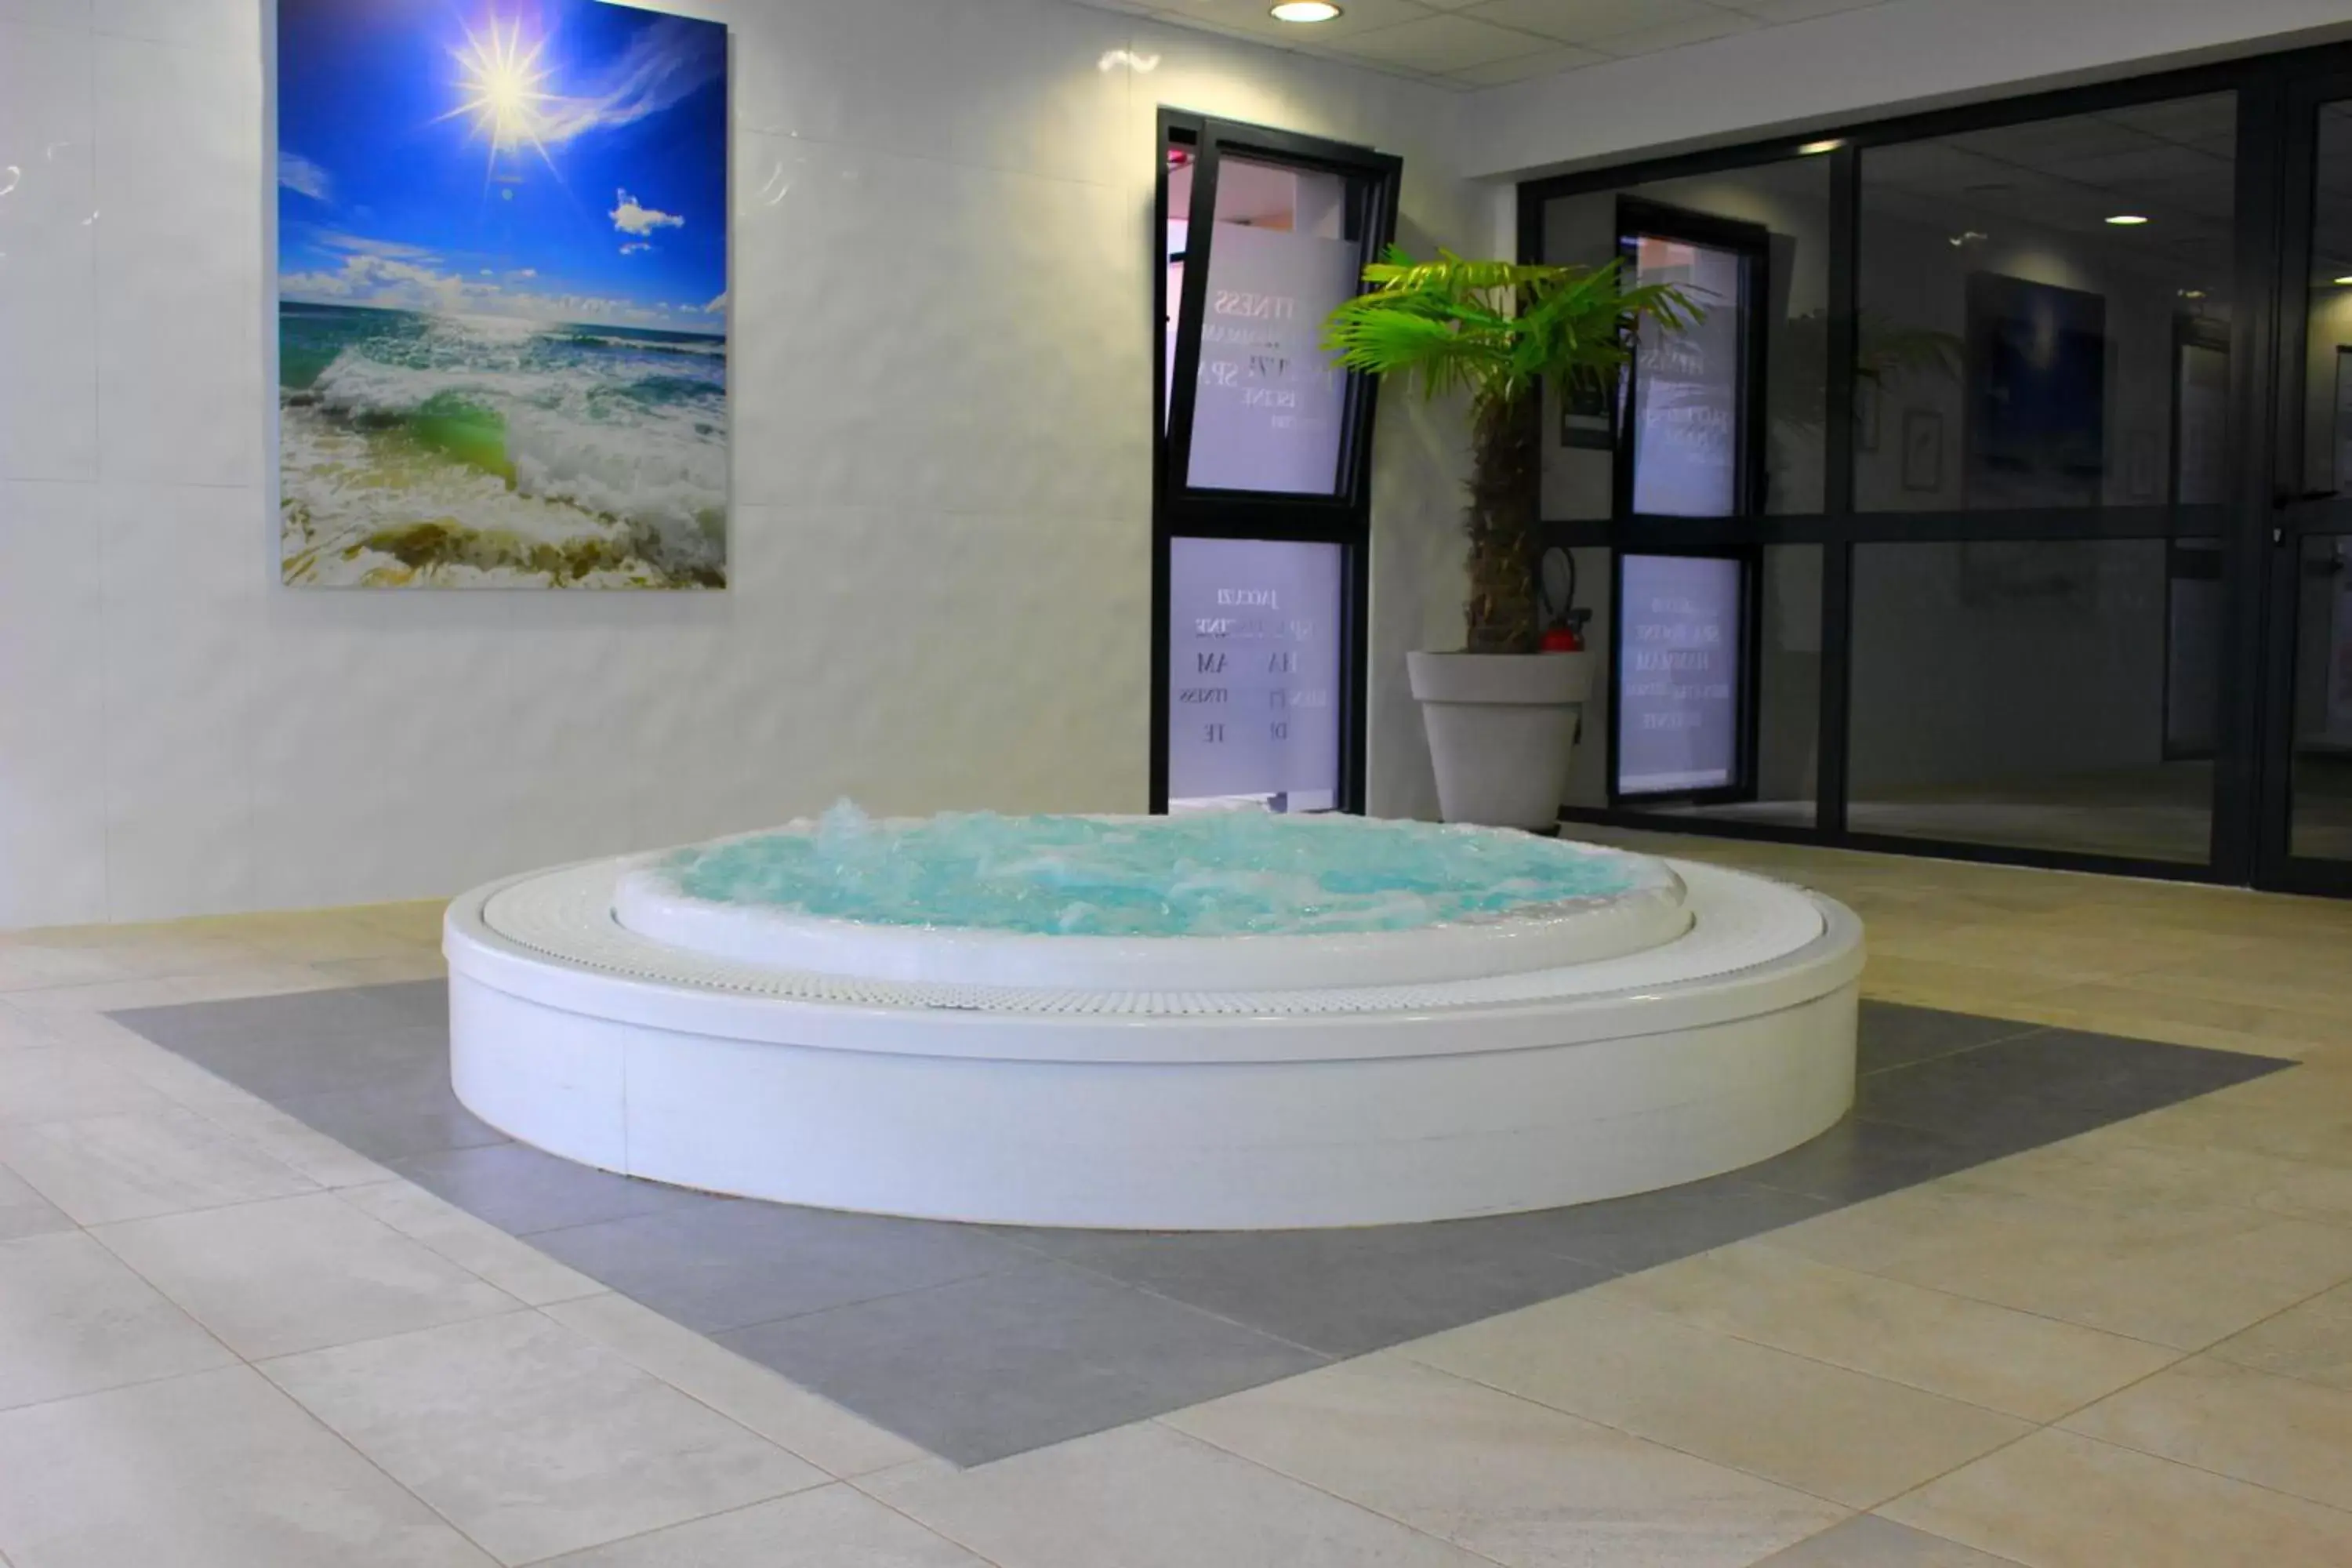 Hot Tub in Kyriad Prestige Residence Cabourg-Dives-sur-Mer